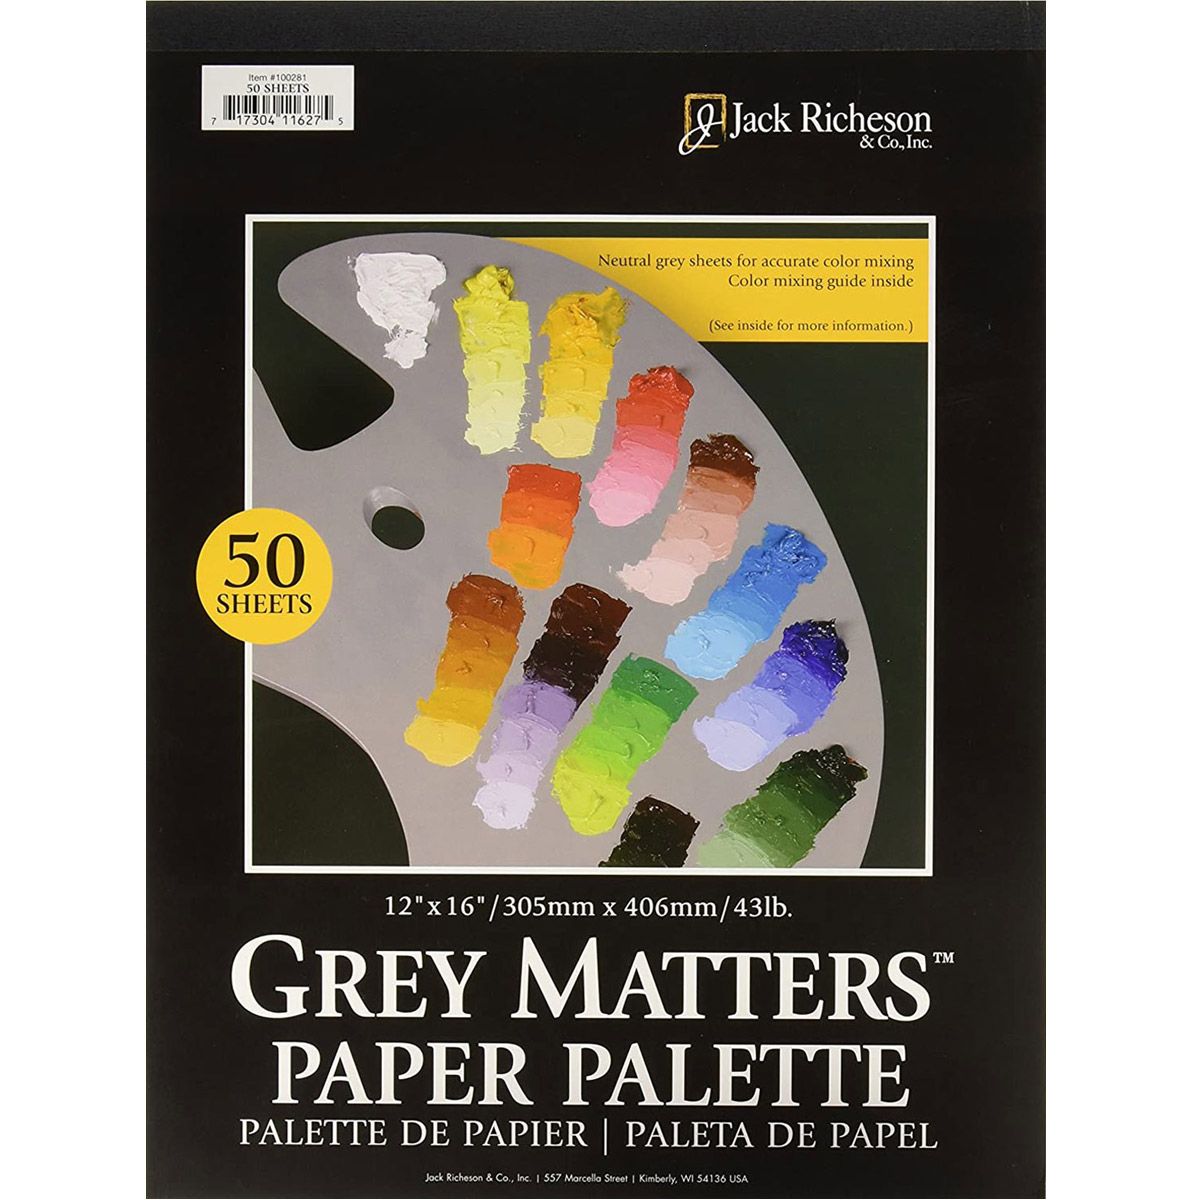 Jack Richeson Grey Matters Palette Pad 12 X 16-Inch 50 Sheets